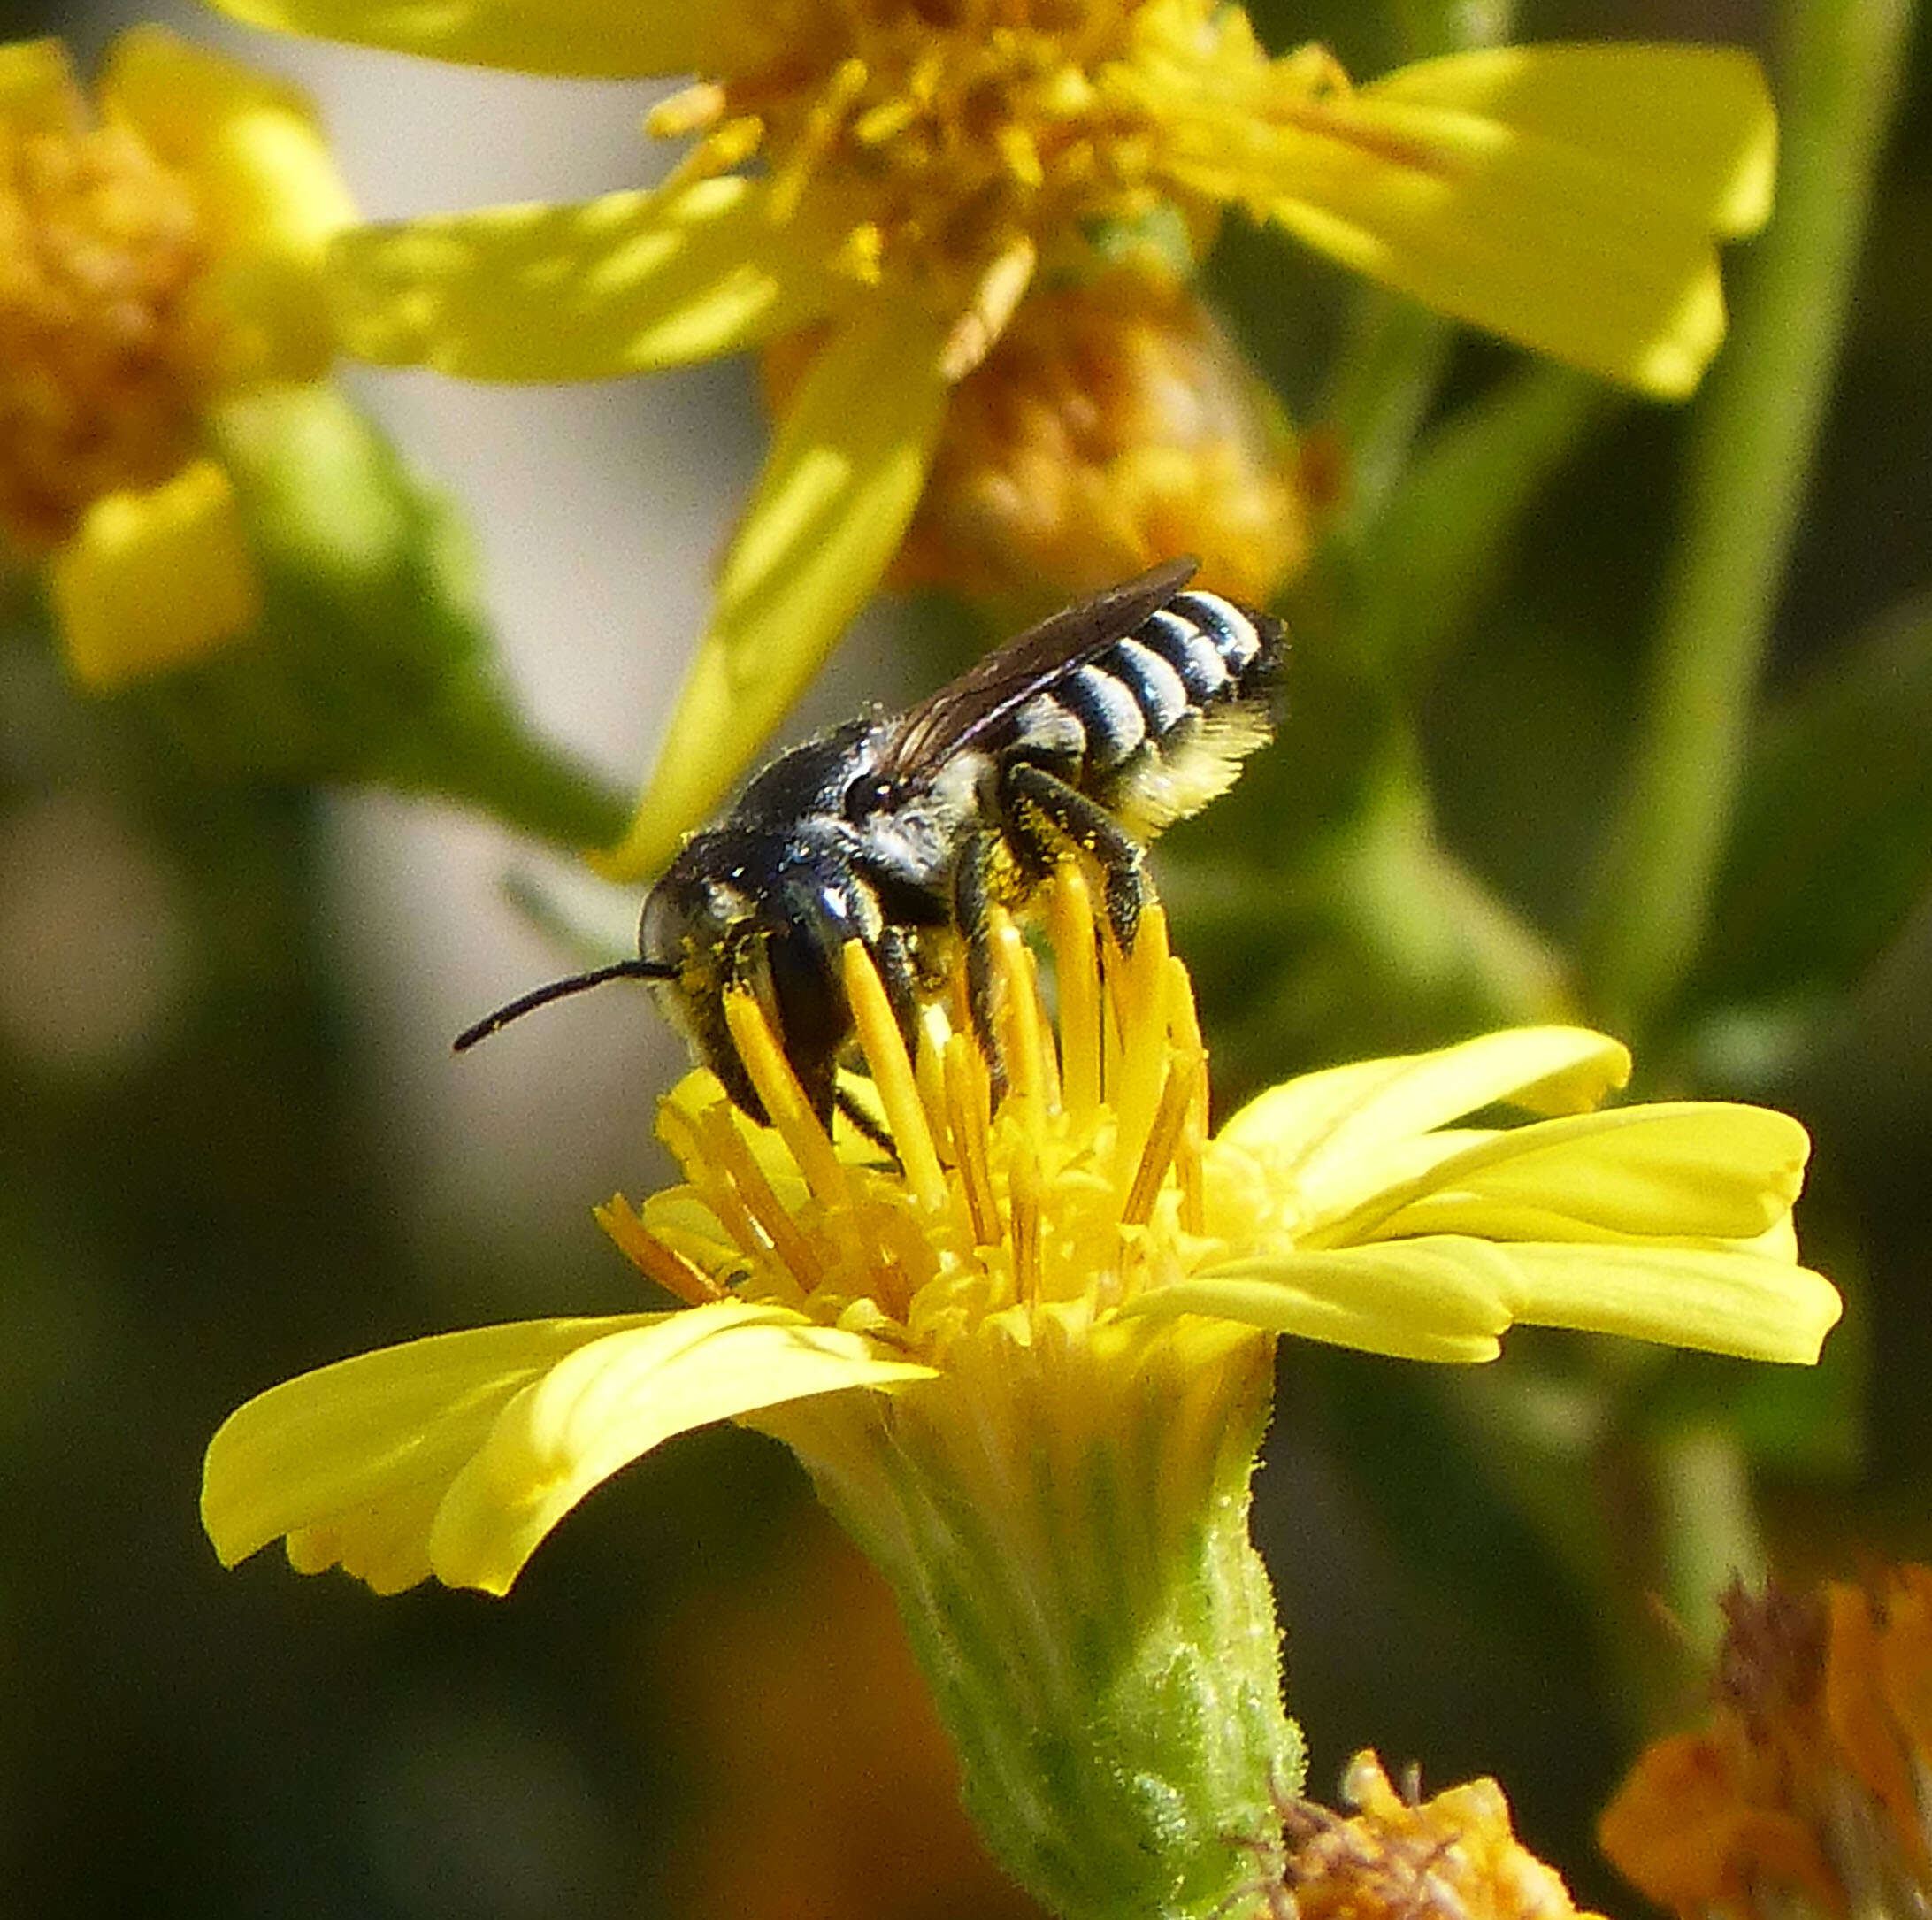 Image of leaf-cutter bees, mason bees, and relatives